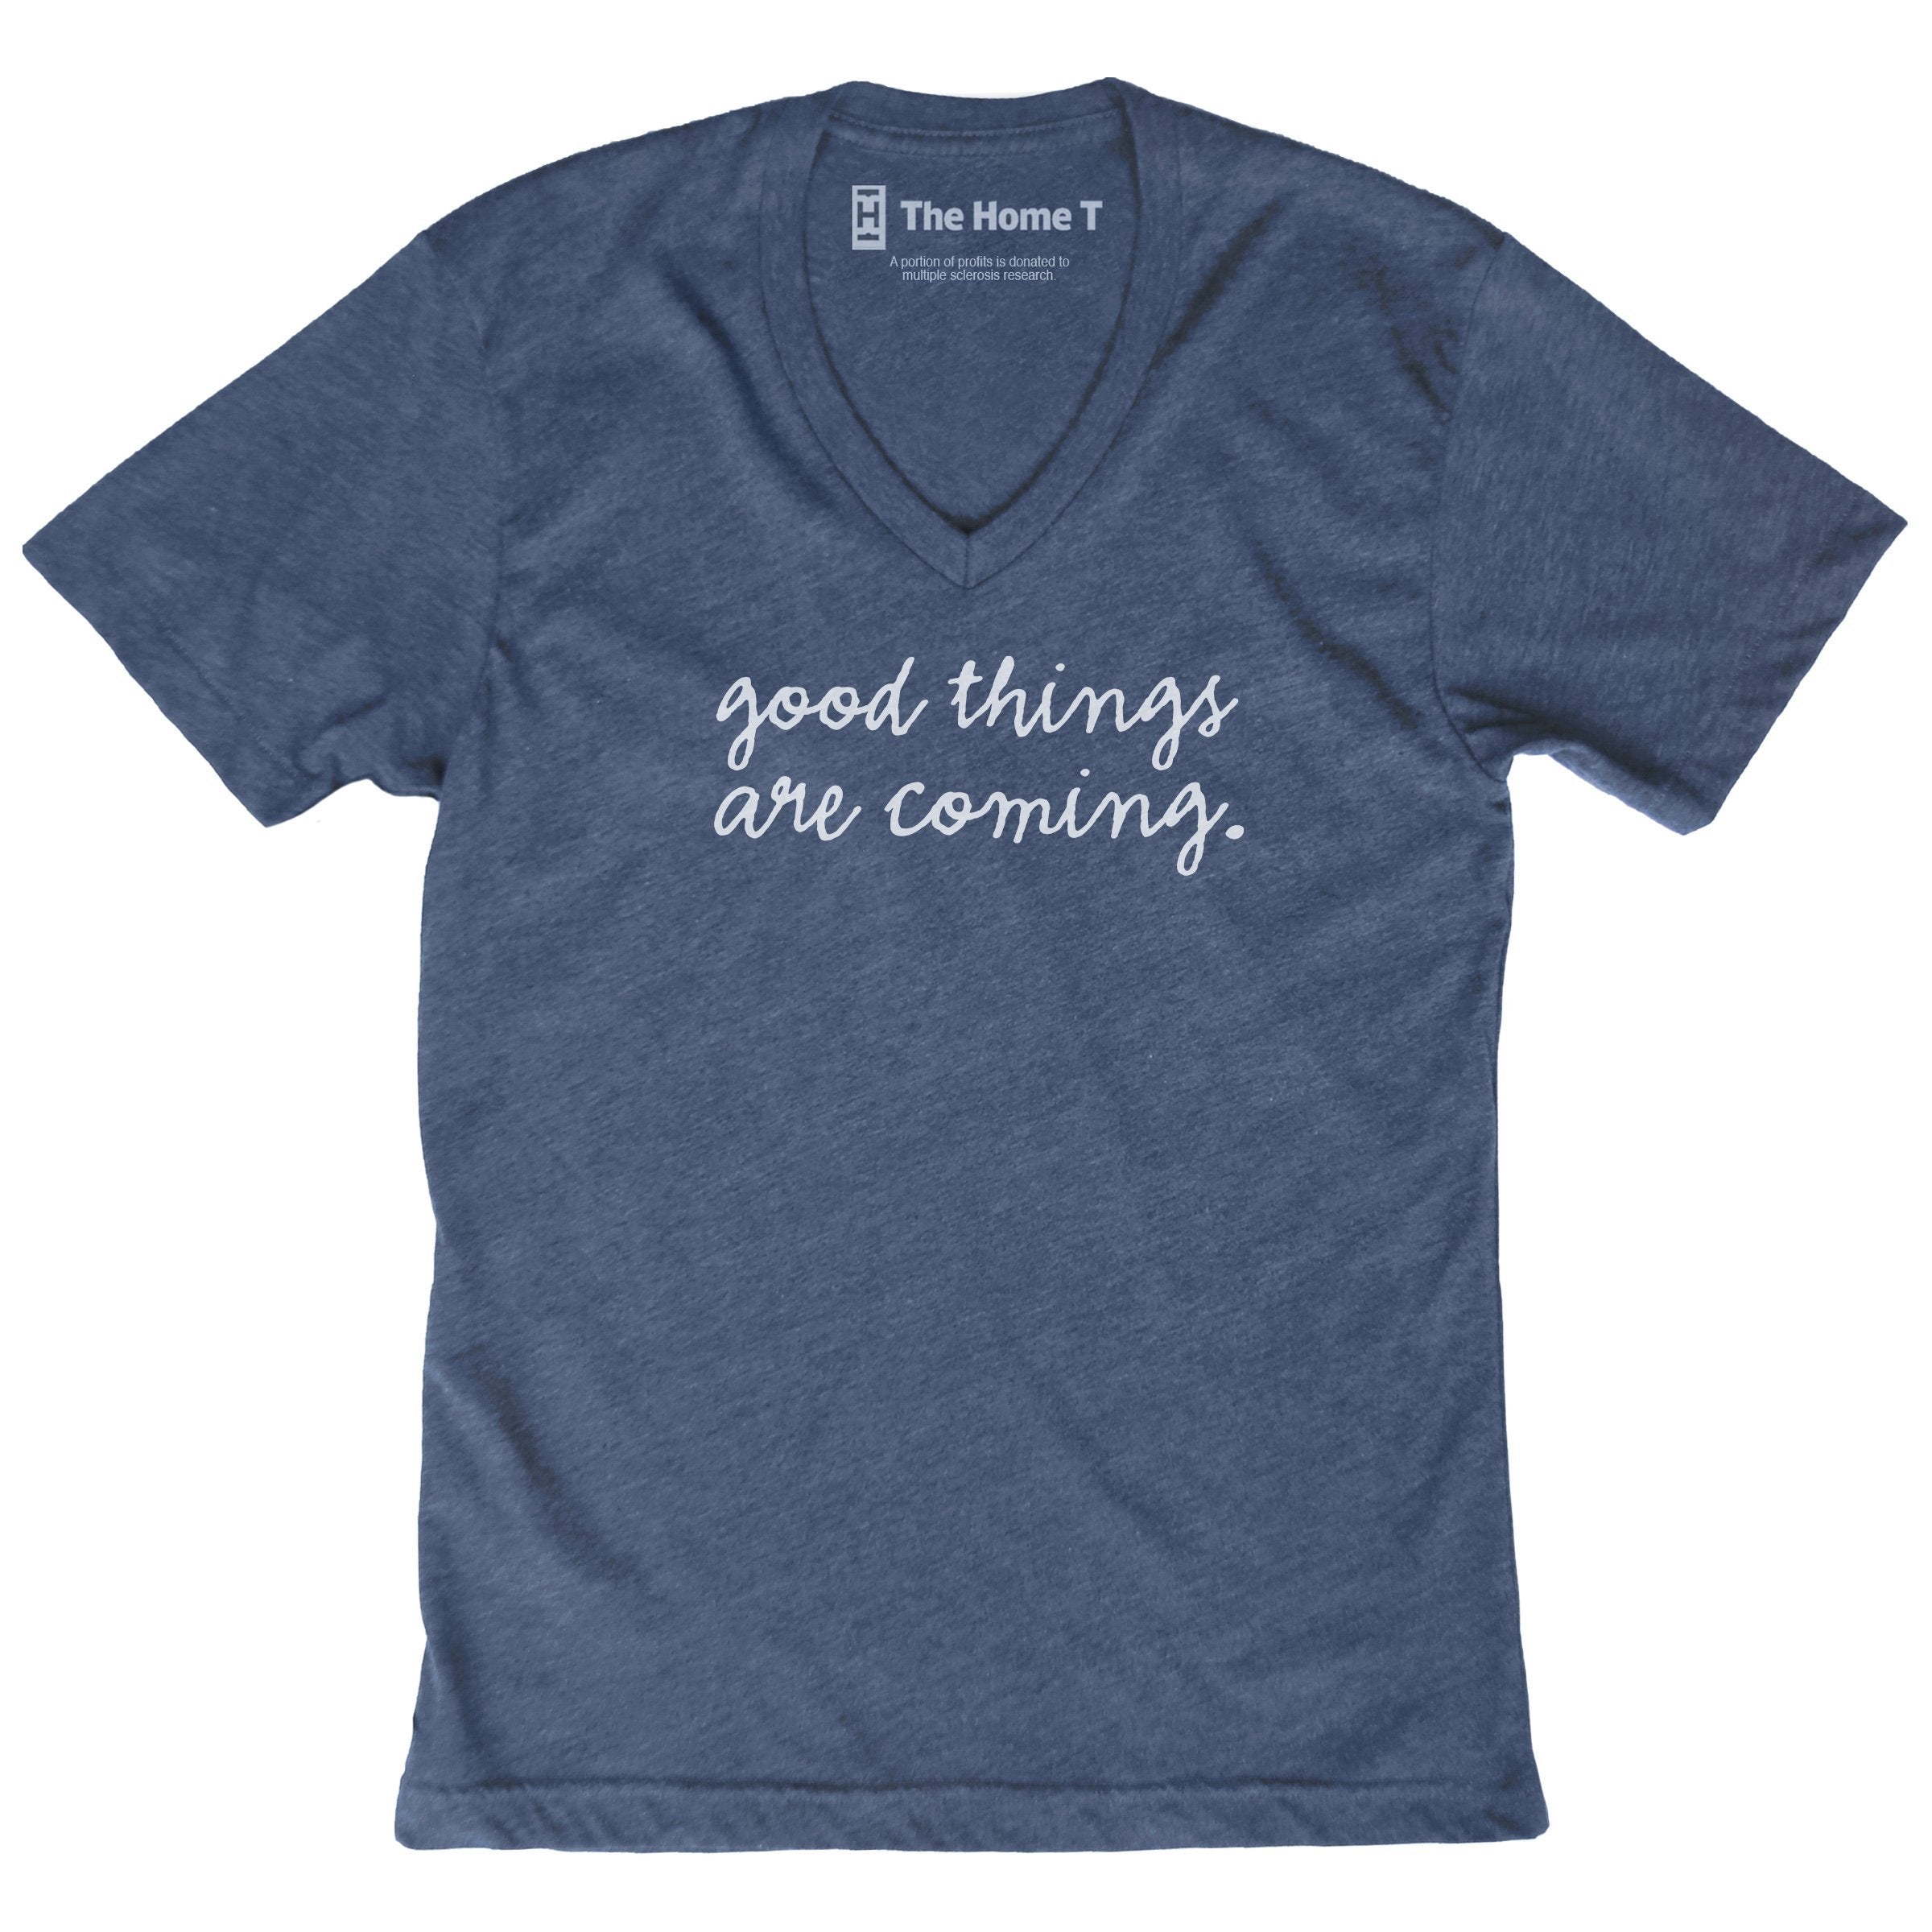 Good Things are Coming V-neck